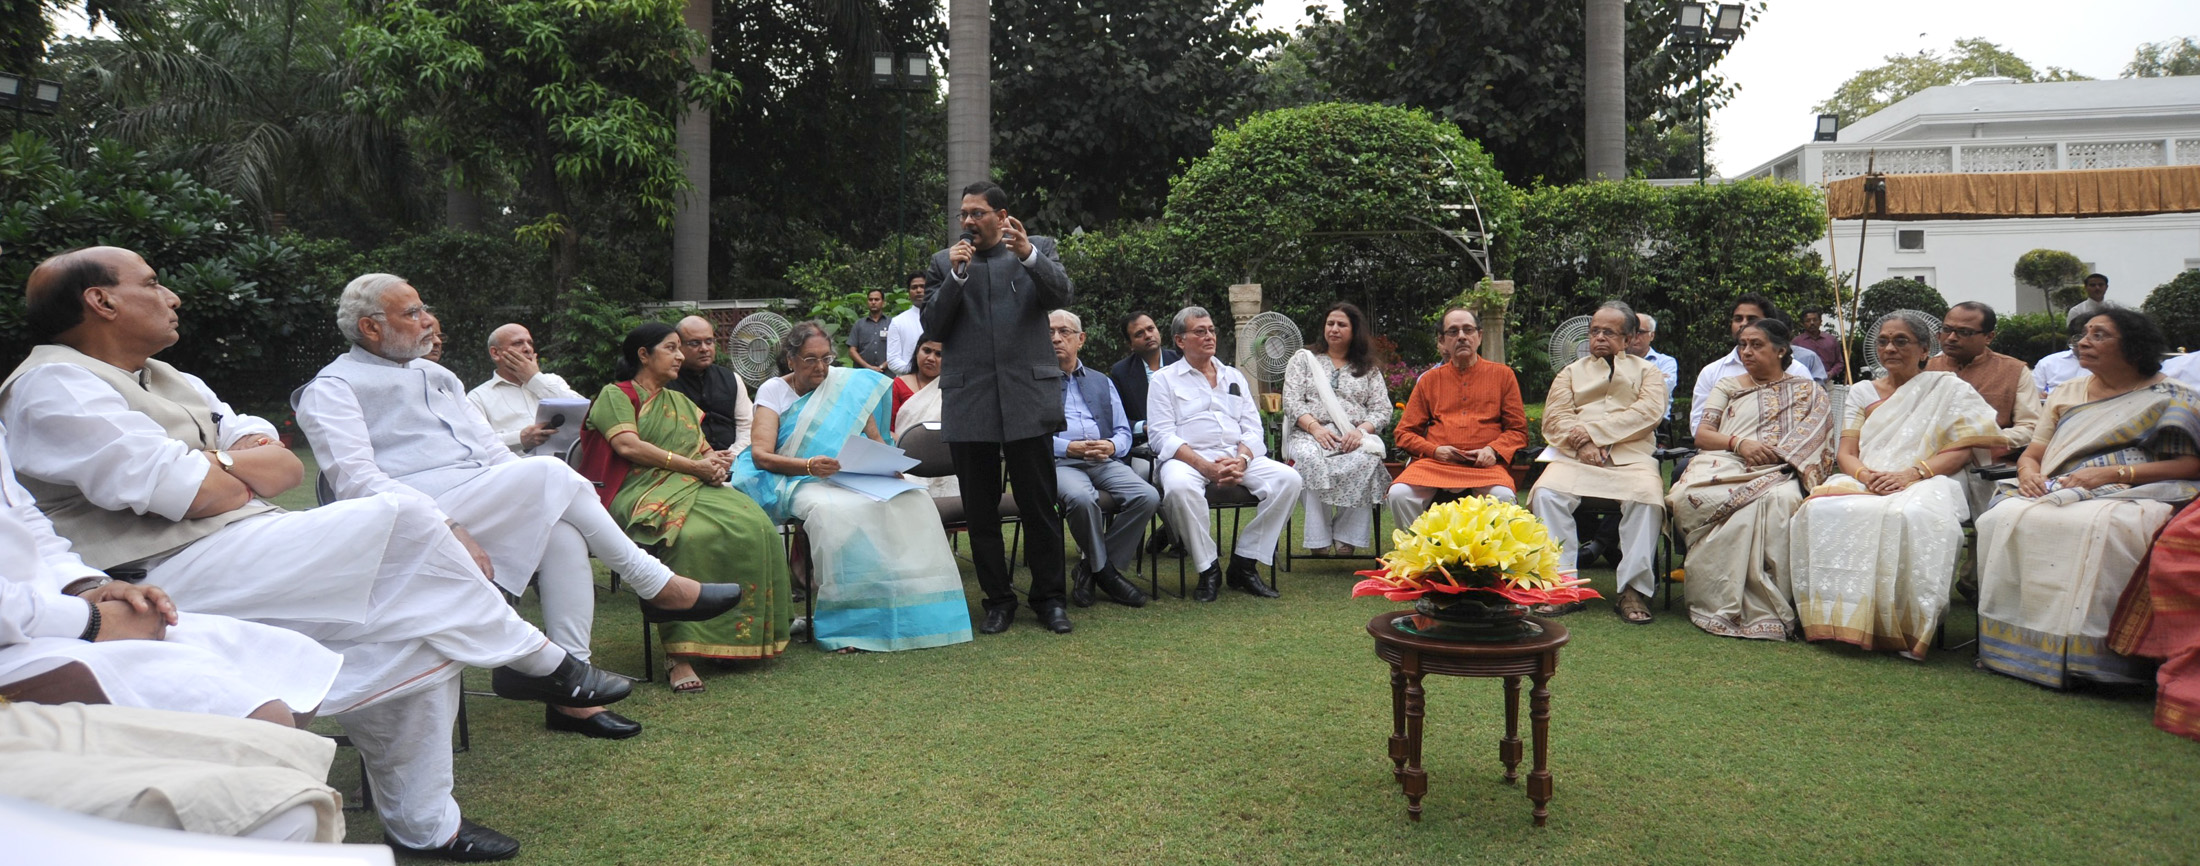 The Prime Minister, Shri Narendra Modi interacting with the family members of Netaji Subhas Chandra Bose, at 7, Race Course Road, in New Delhi on October 14, 2015.